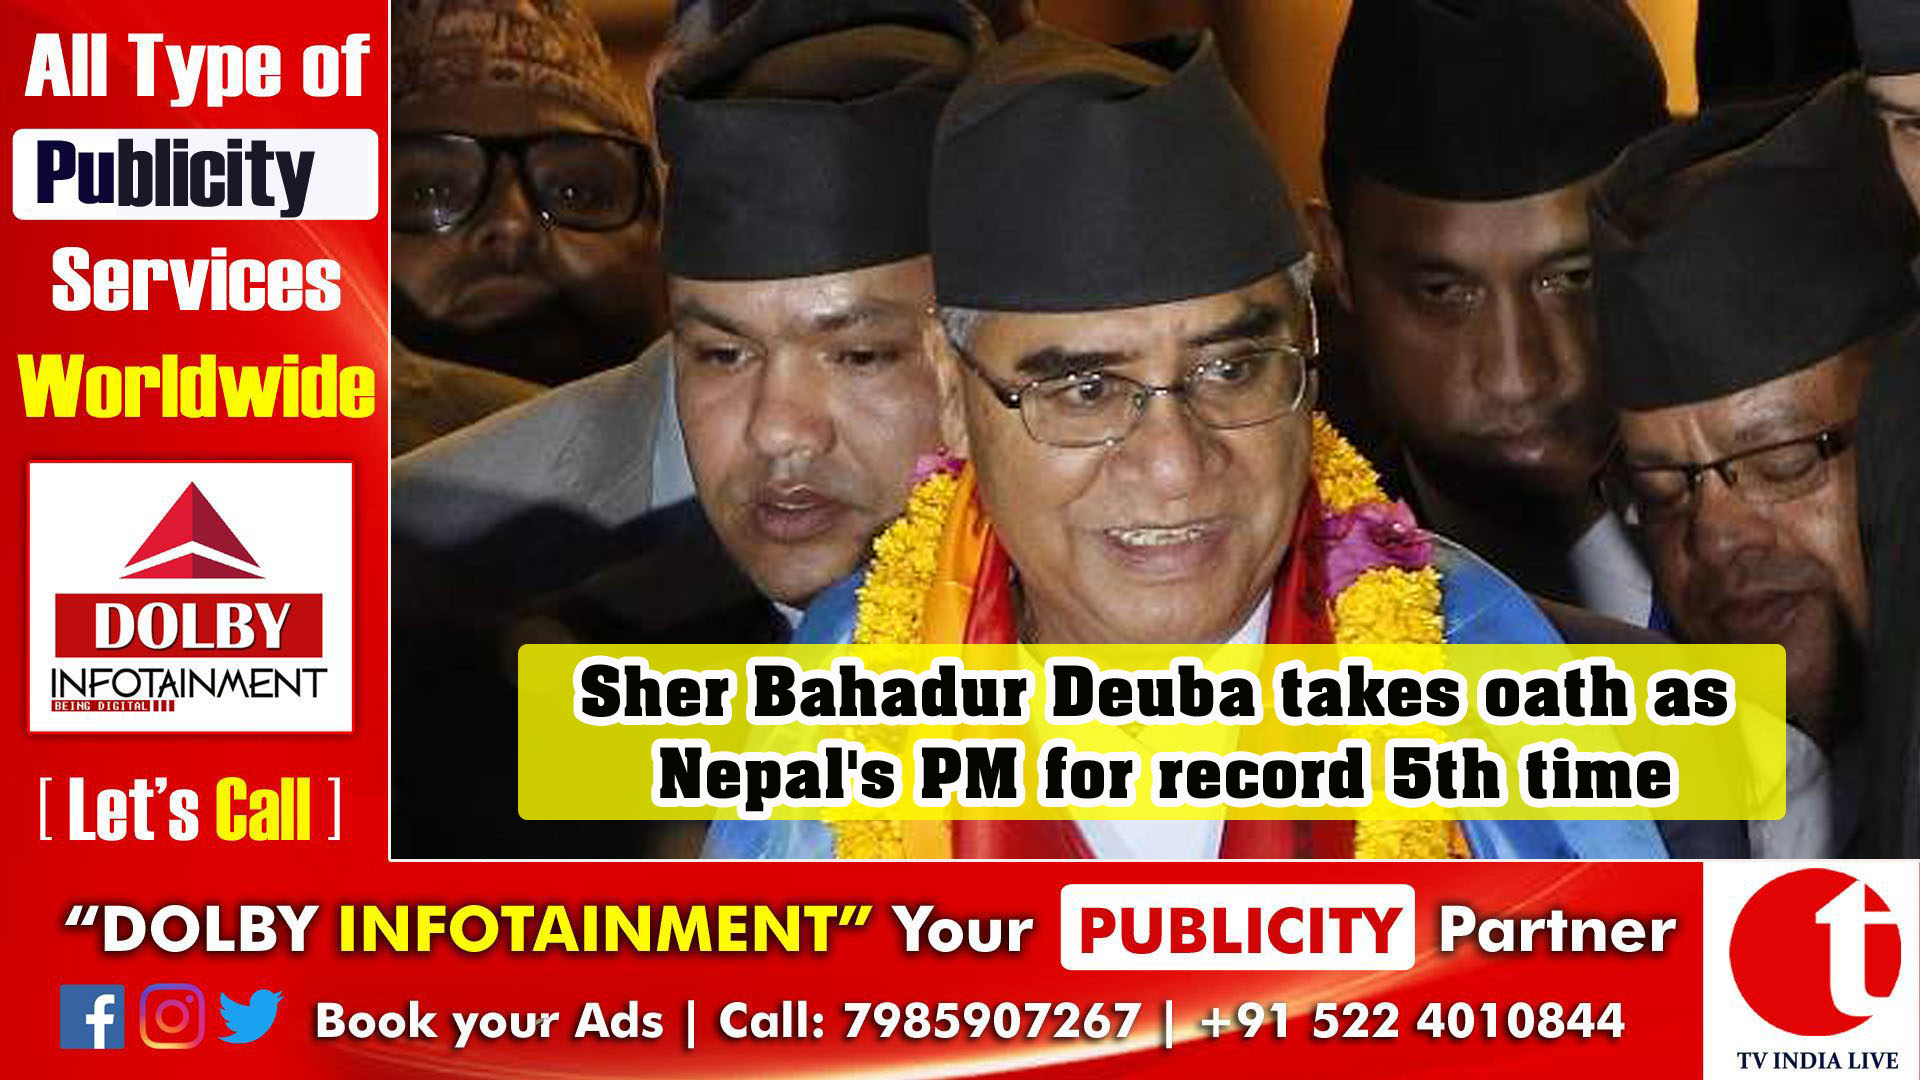 Sher Bahadur Deuba takes oath as Nepal's PM for record 5th time